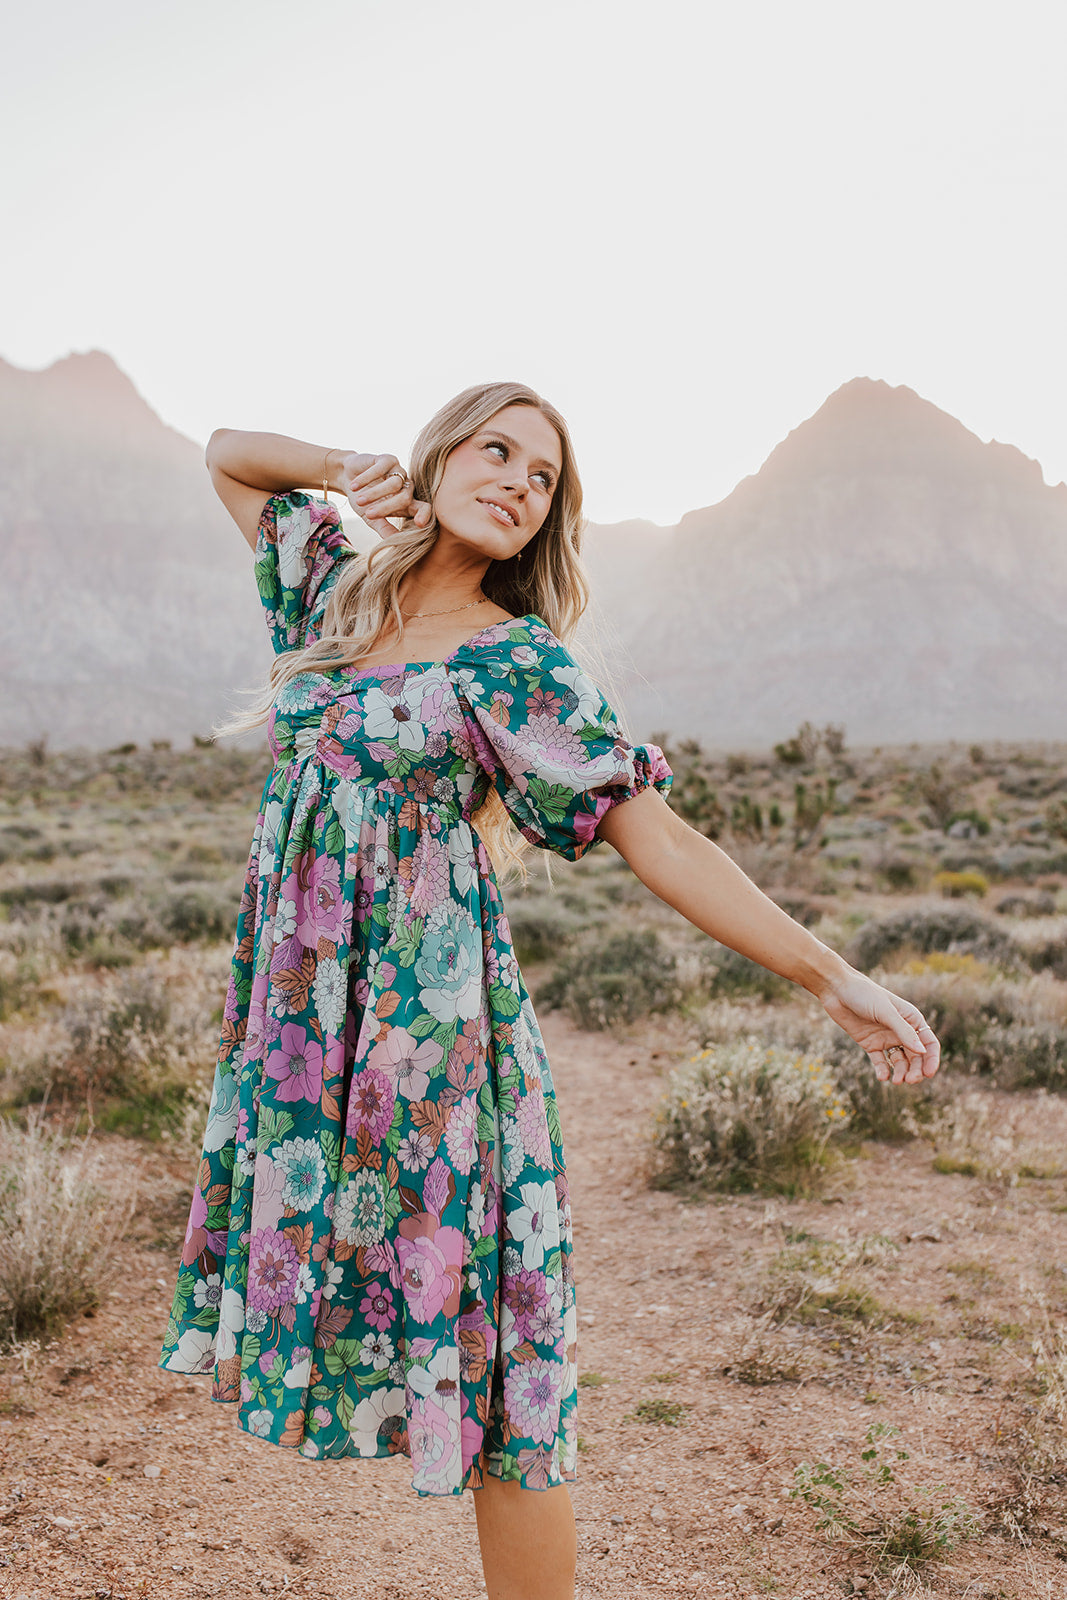 THE LUNA SWEETHEART DRESS IN TEAL FLORAL BY PINK DESERT